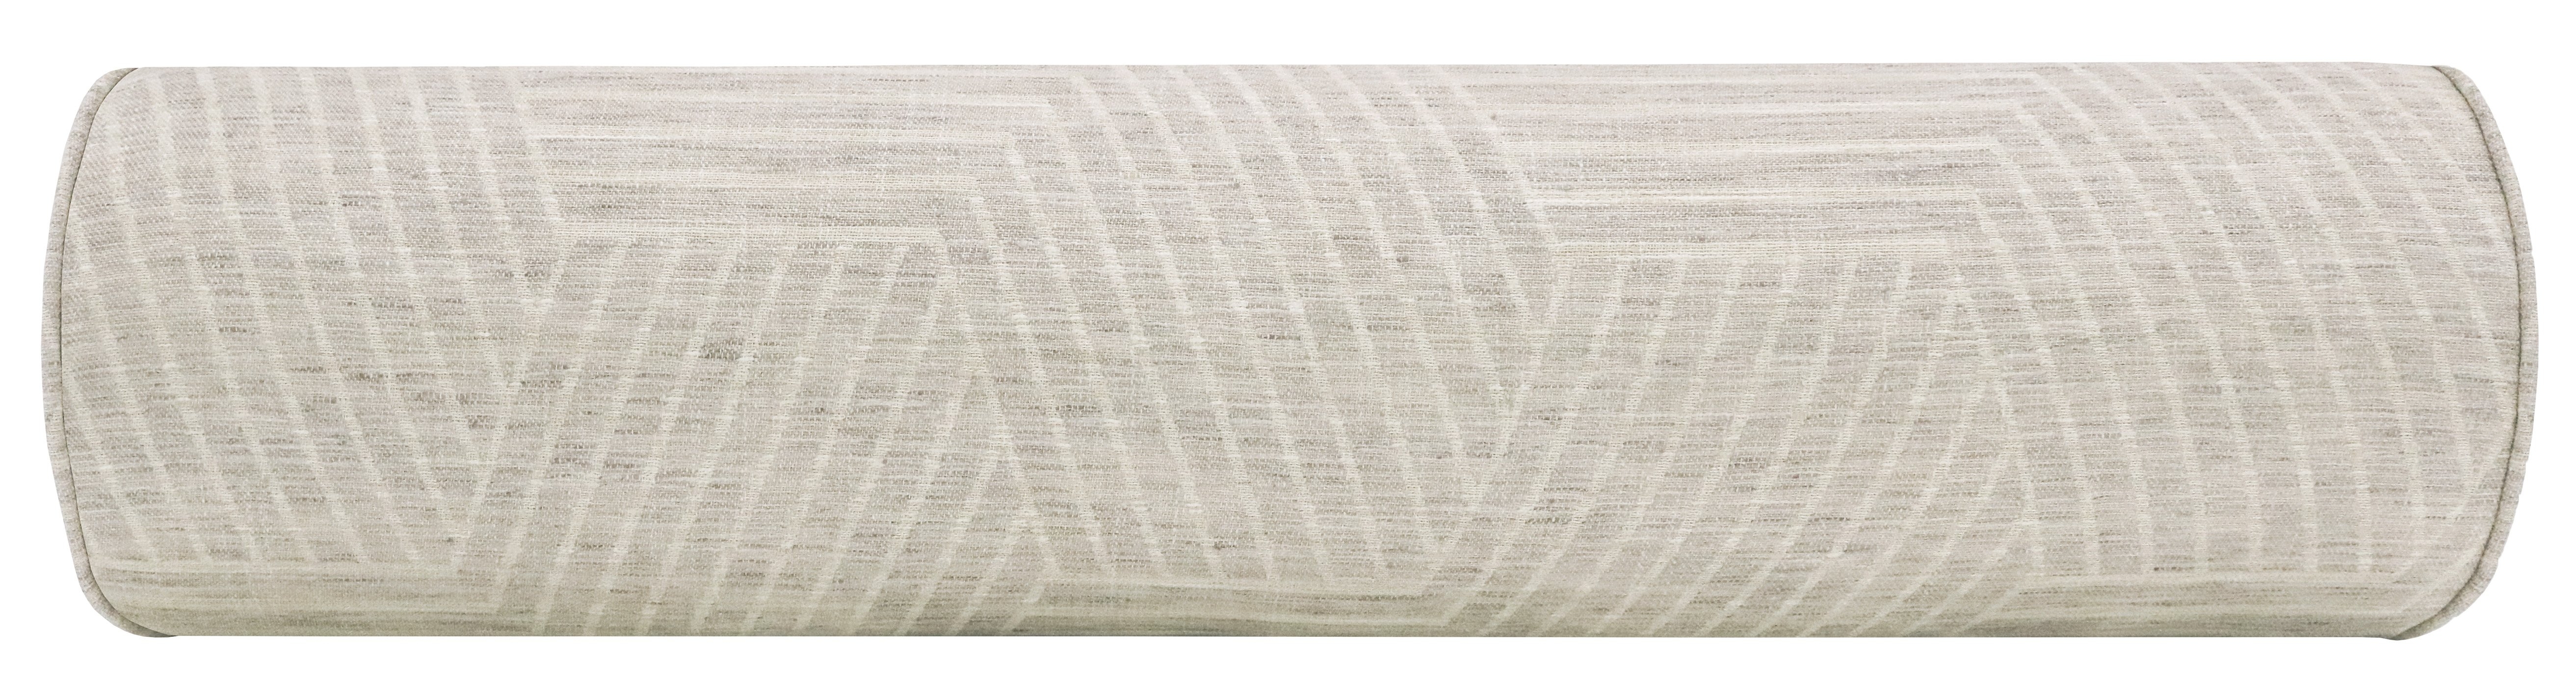 THE BOLSTER :: LABYRINTH LINEN // OYSTER - KING // 9" X 48" - Image 3